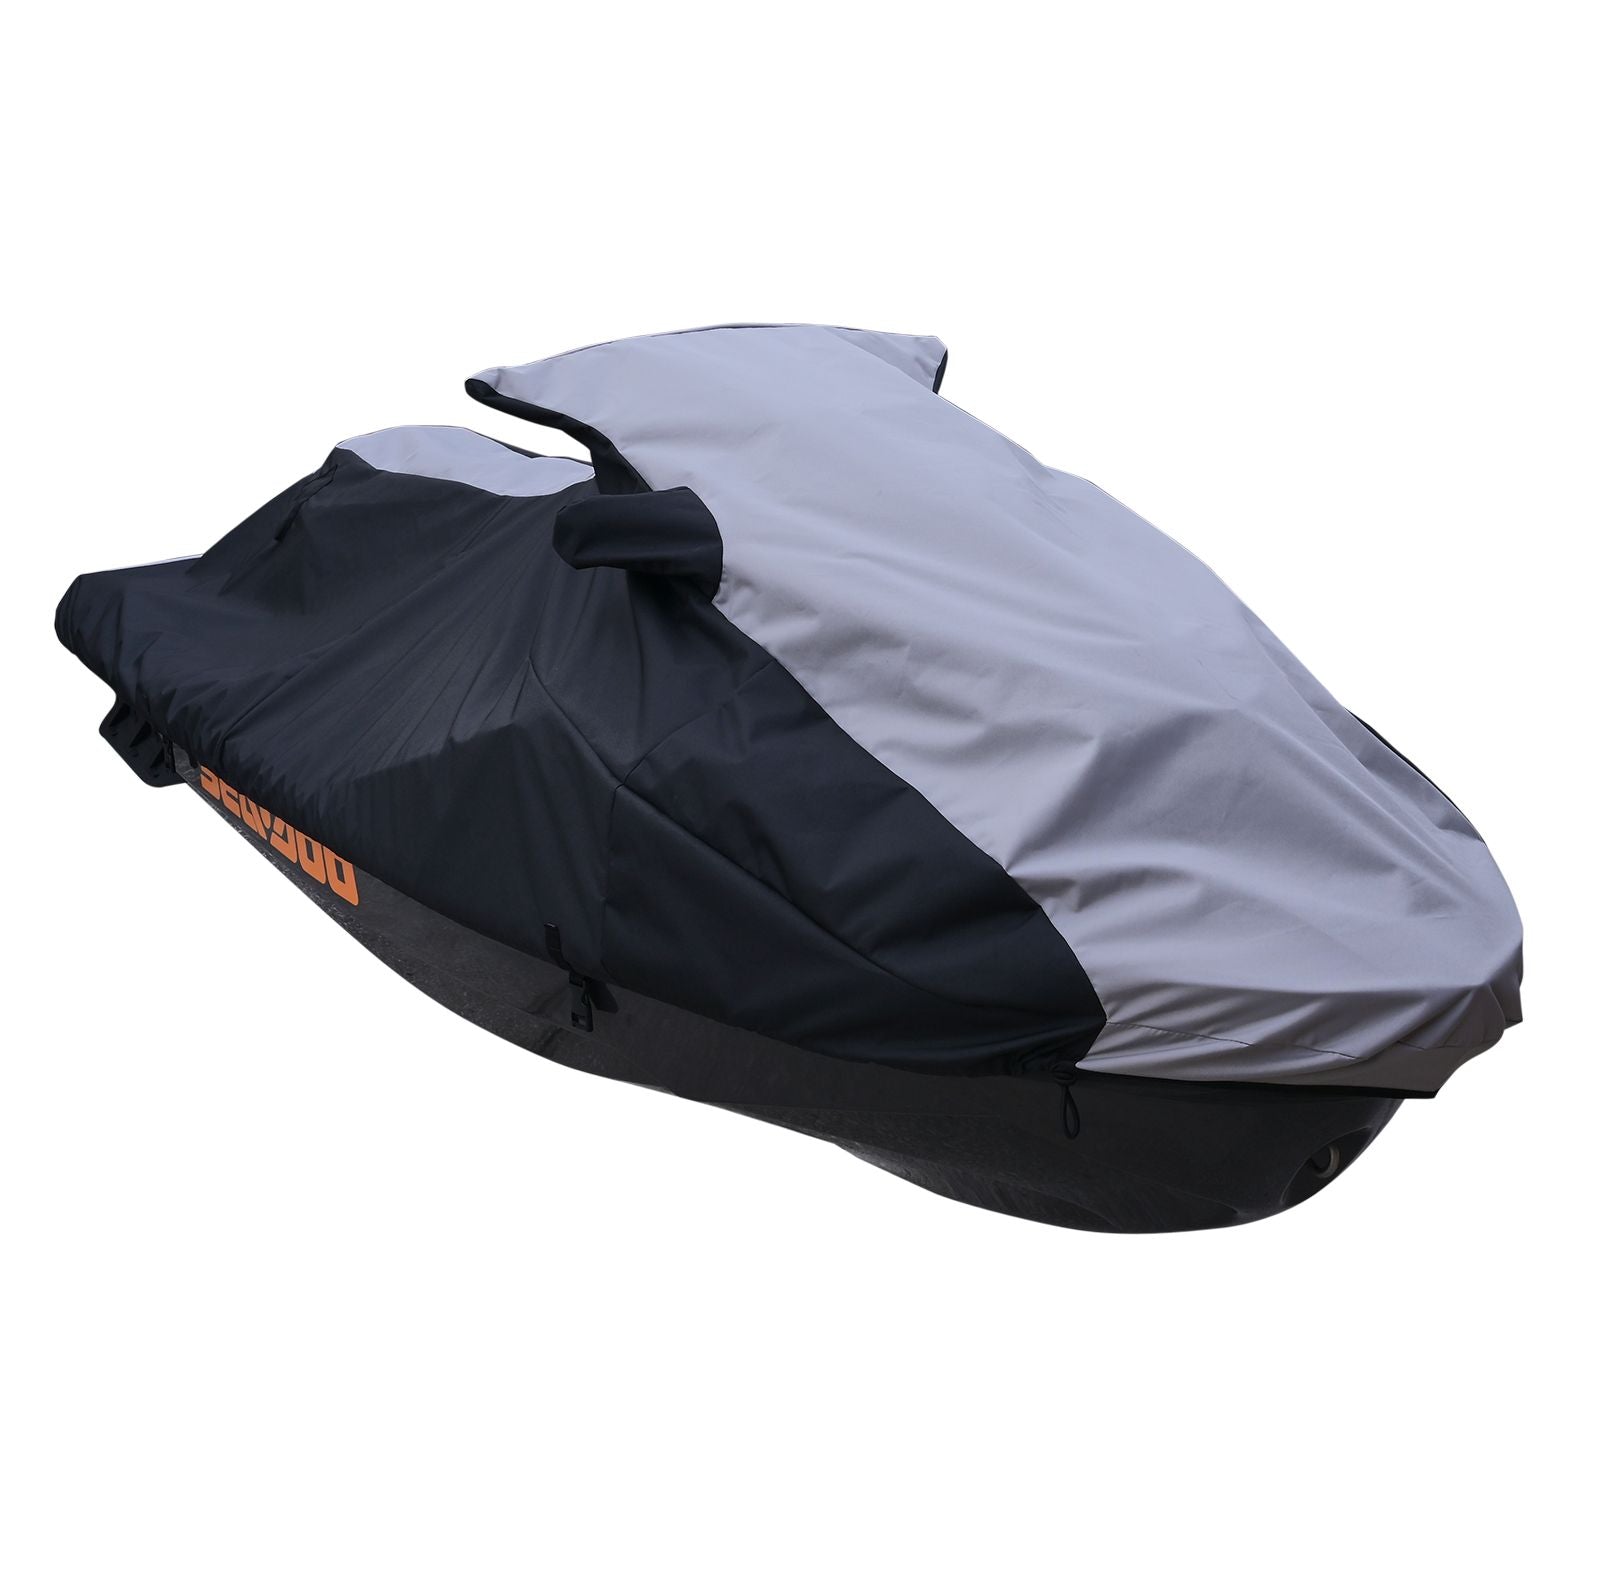 Trailerable Storage cover with vents for Yamaha 2000-2002 GP 1200R / 2001-2005 GP800R / 2003-2008 GP1300R